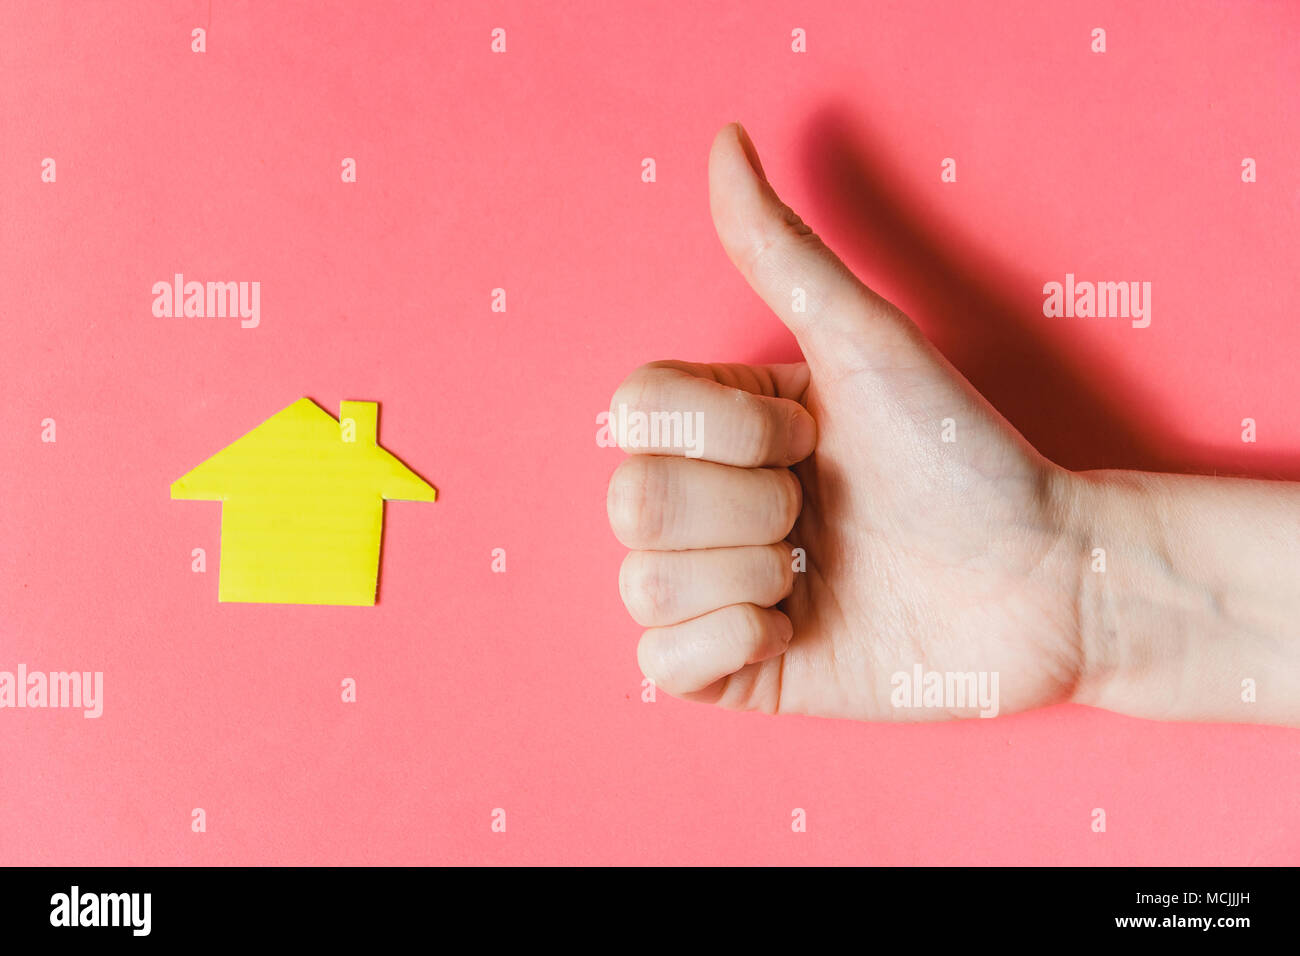 Real Estate Concept. Hand Showing Thumbs up at Miniature House on Pink Backgroun Stock Photo